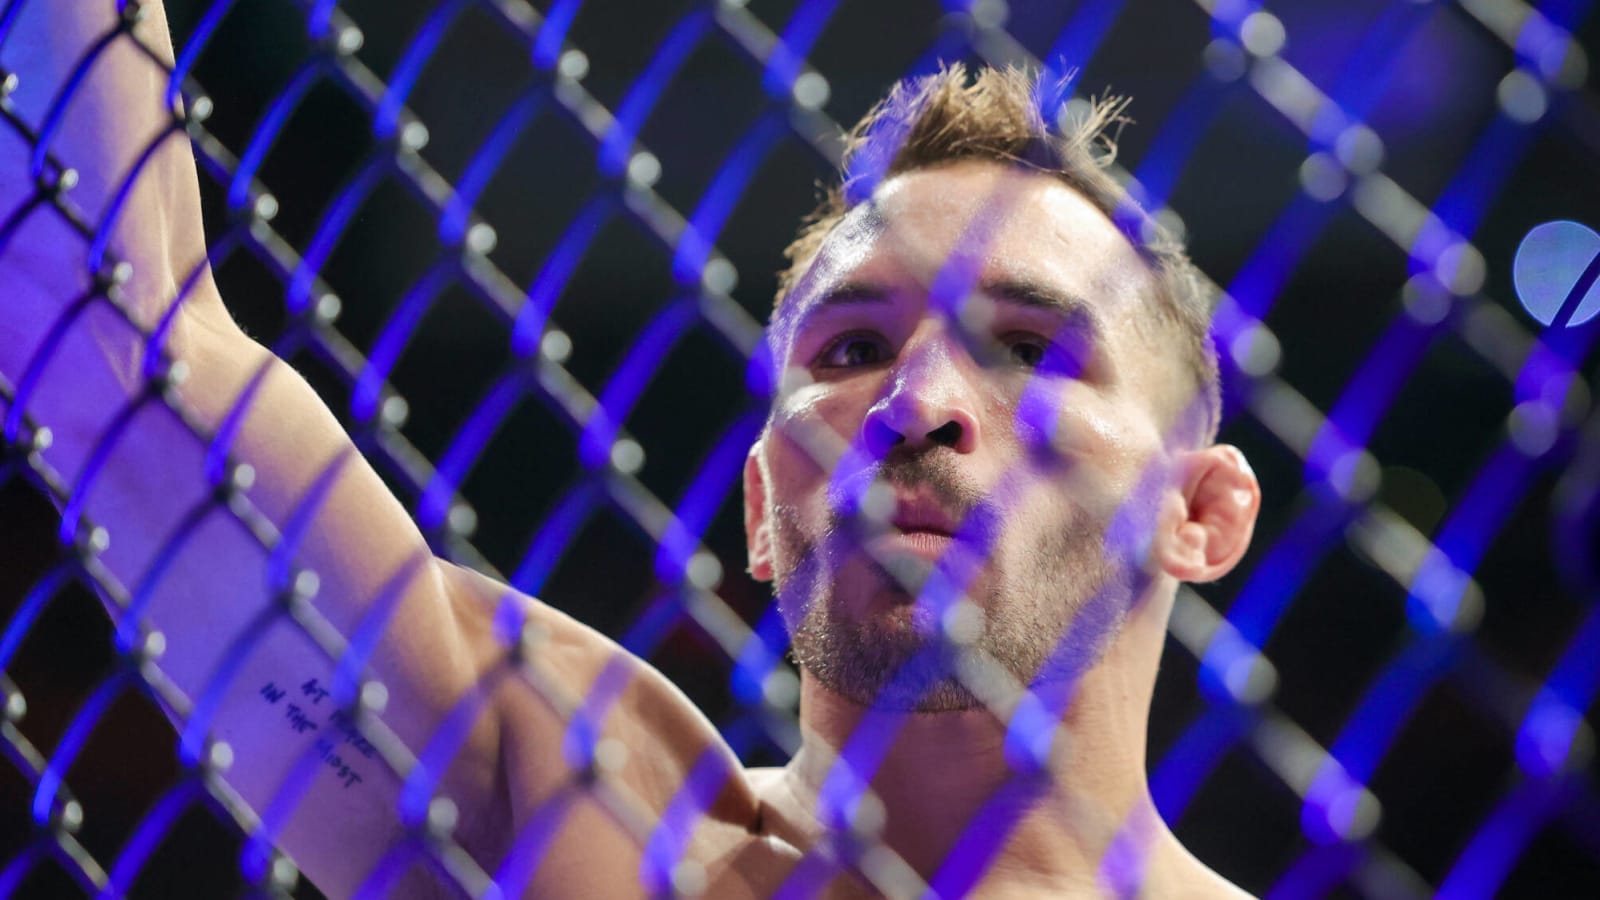 Watch: Michael Chandler calls out Conor McGregor on WWE ‘Monday Night Raw’